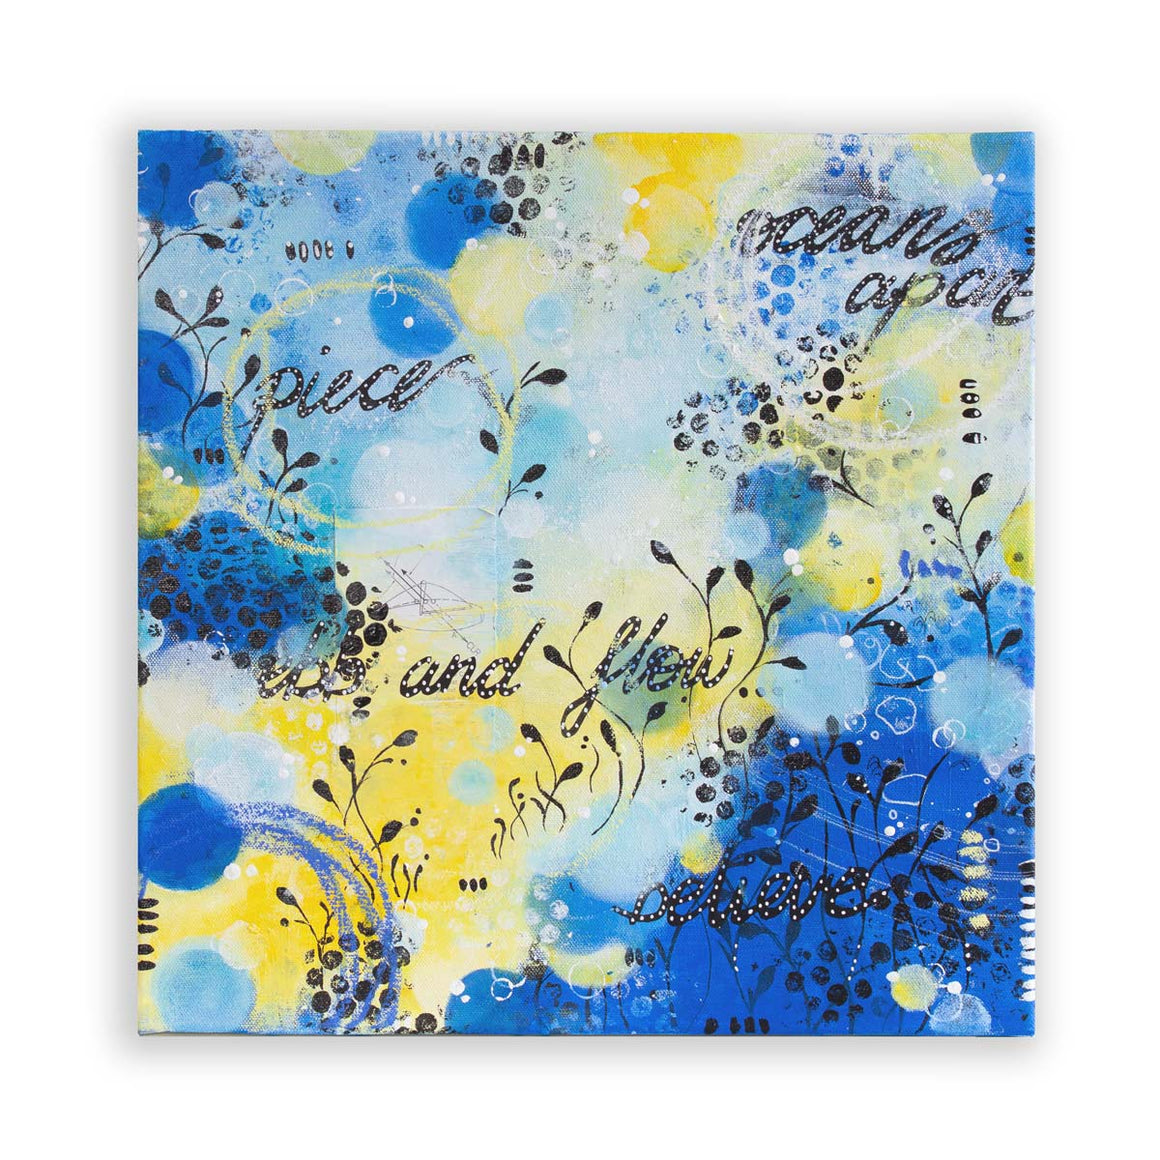 Making my way to you | Blue Yellow Abstract Sea Painting 40cm